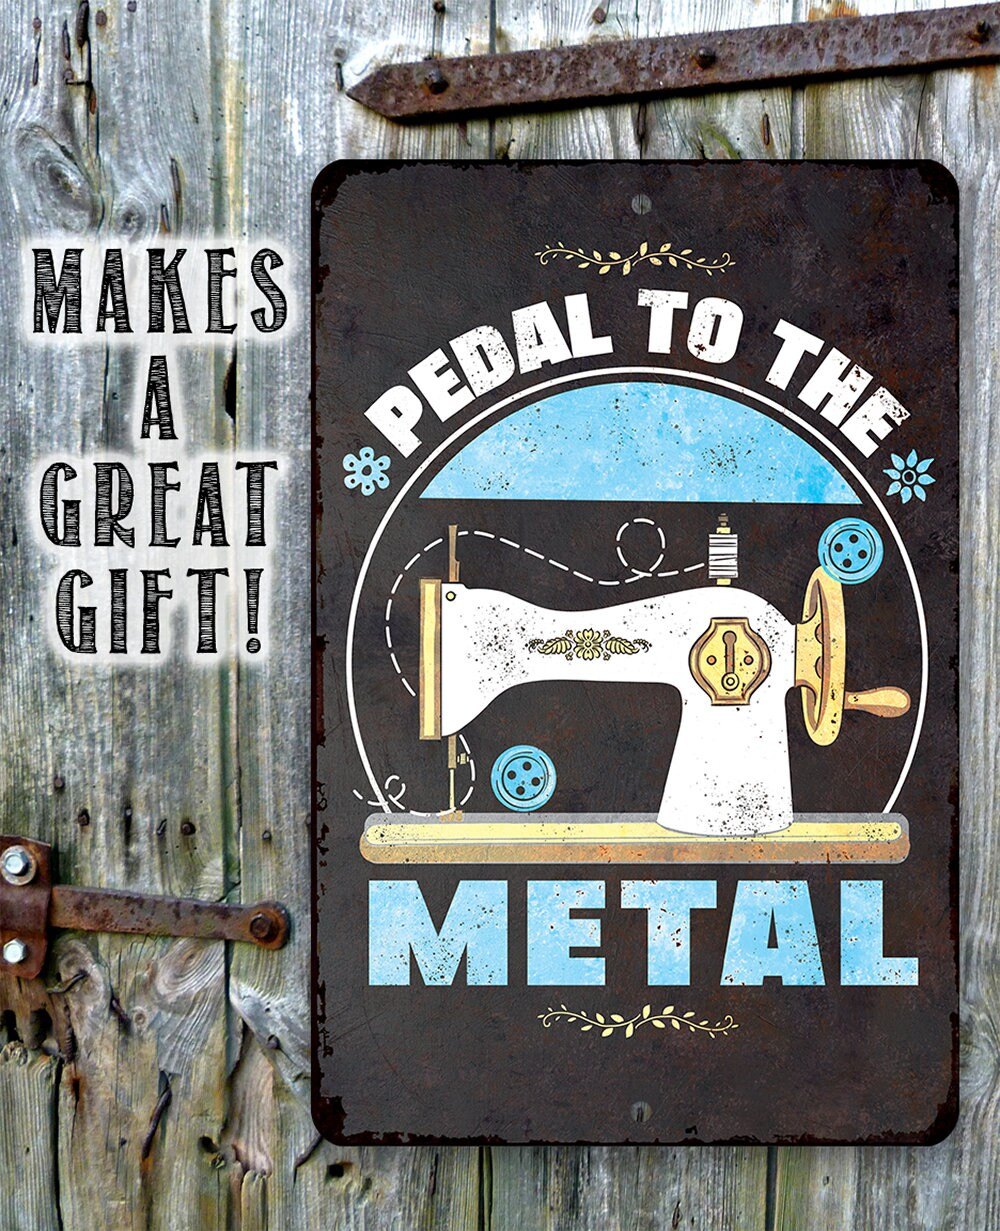 Pedal to The Metal - Metal Sign Metal Sign Lone Star Art 